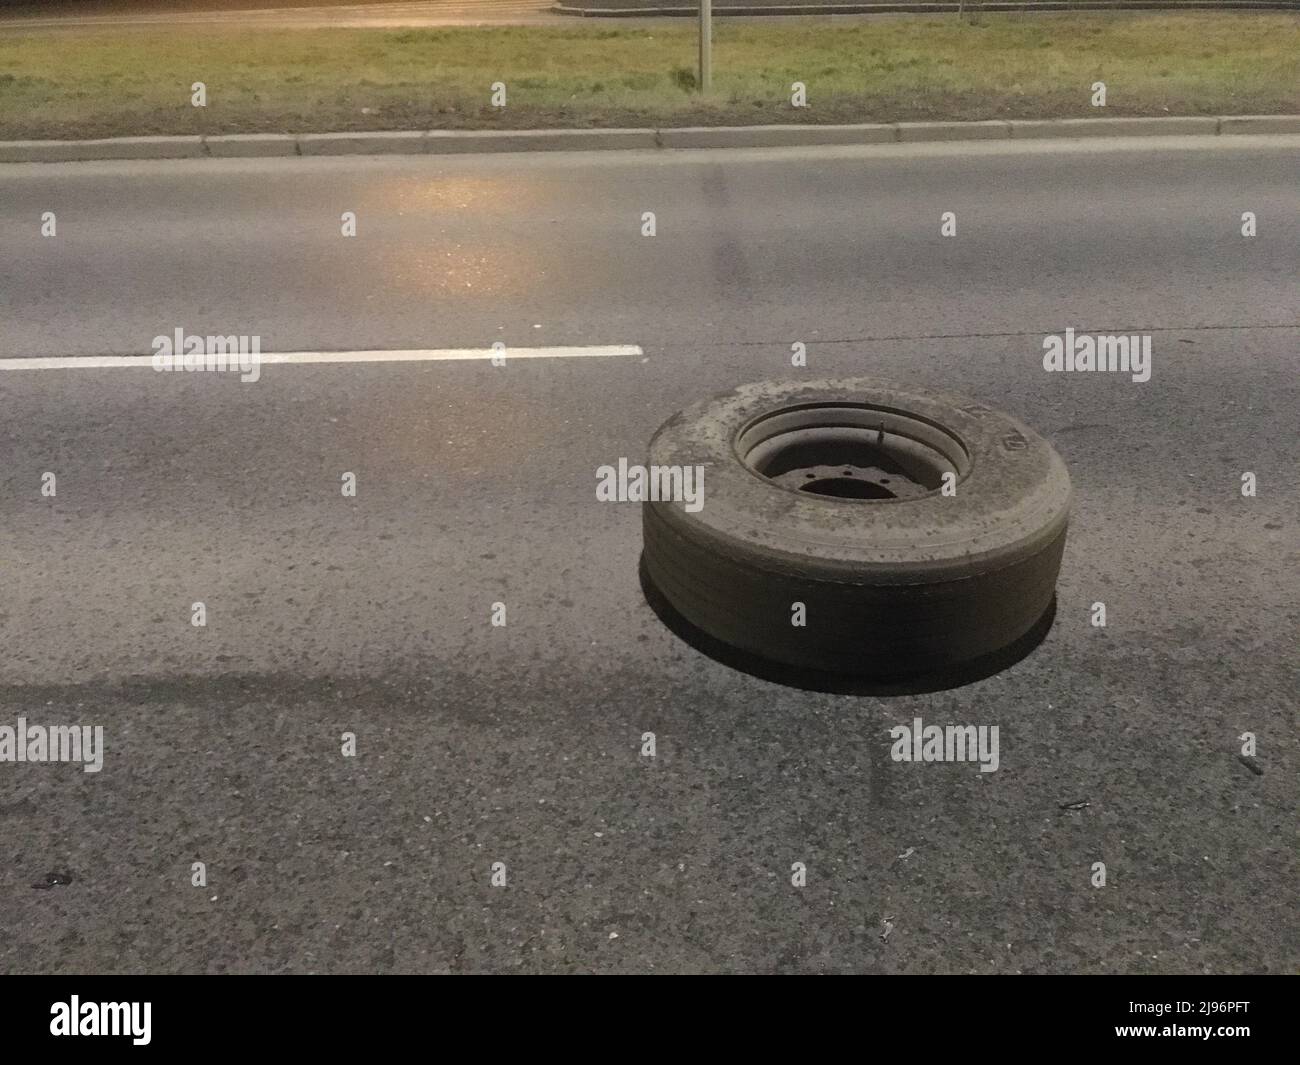 The dangerous obstacle lying on the road, the fallen of wheel from the truck. Accident can easily happen. Stock Photo